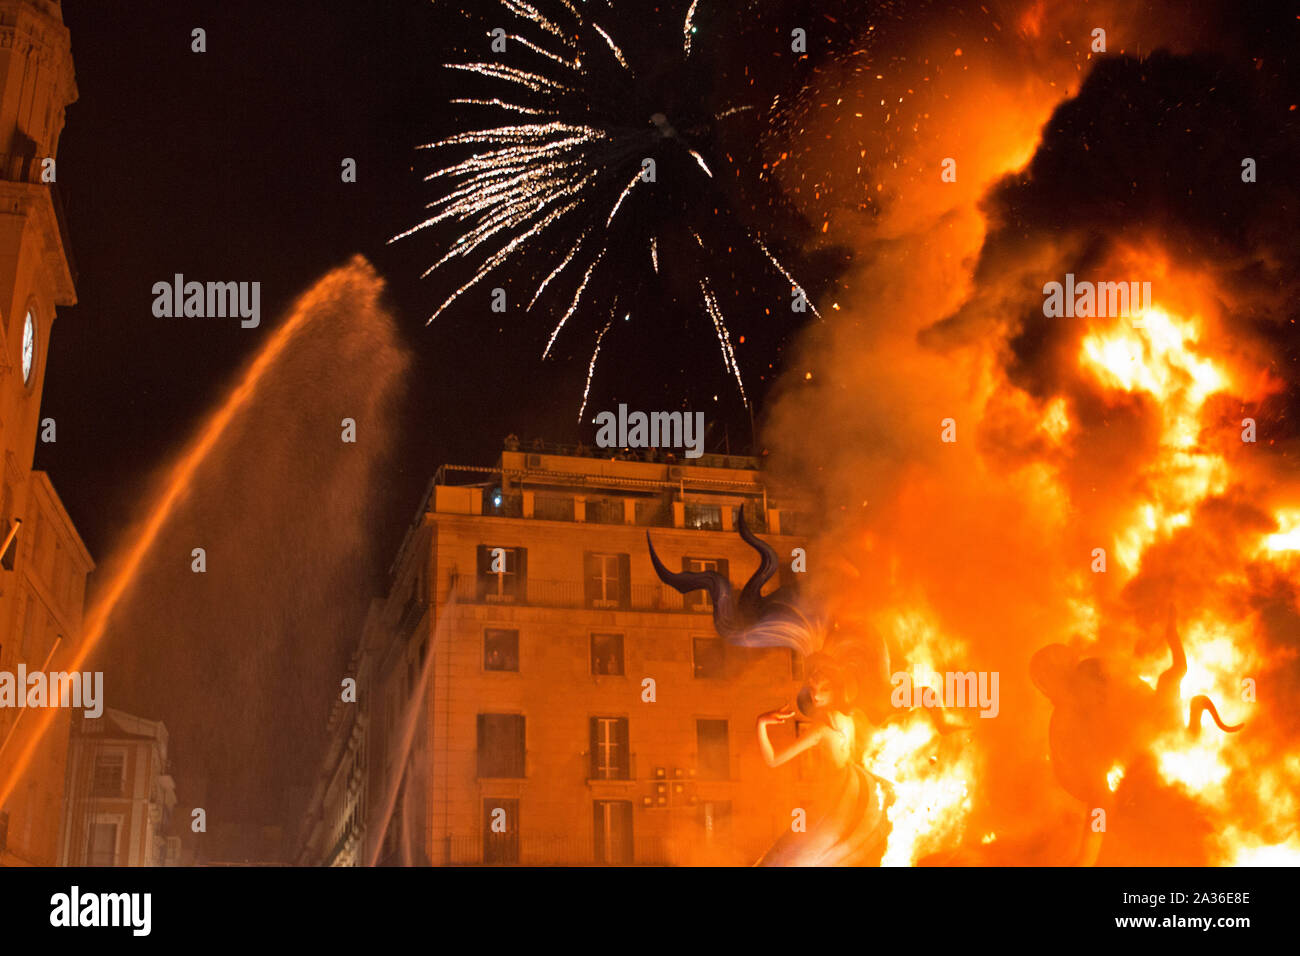 The festival of the Hogueras de San Juan is Alicante City's most important event when effigies are set alight on the last night celebrating fire. Stock Photo